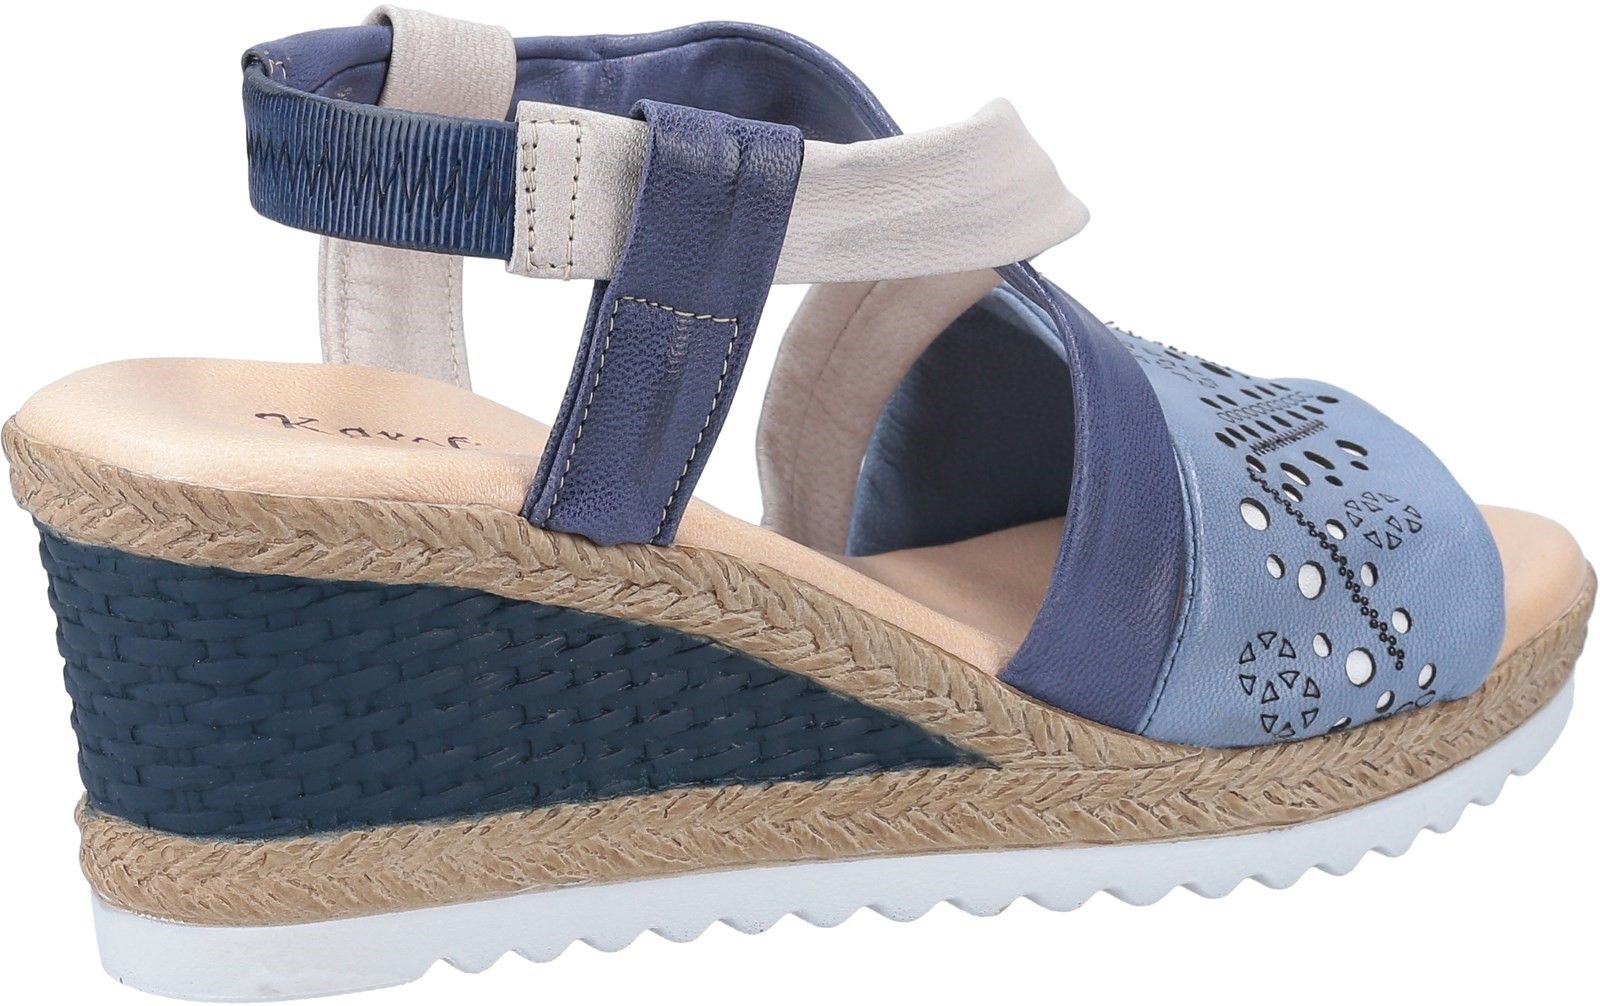 Riva Castello is a womens slip on slingback summer sandal with wedge heel, platform sole, soft, multicoloured leather uppers and cushioned insoles.